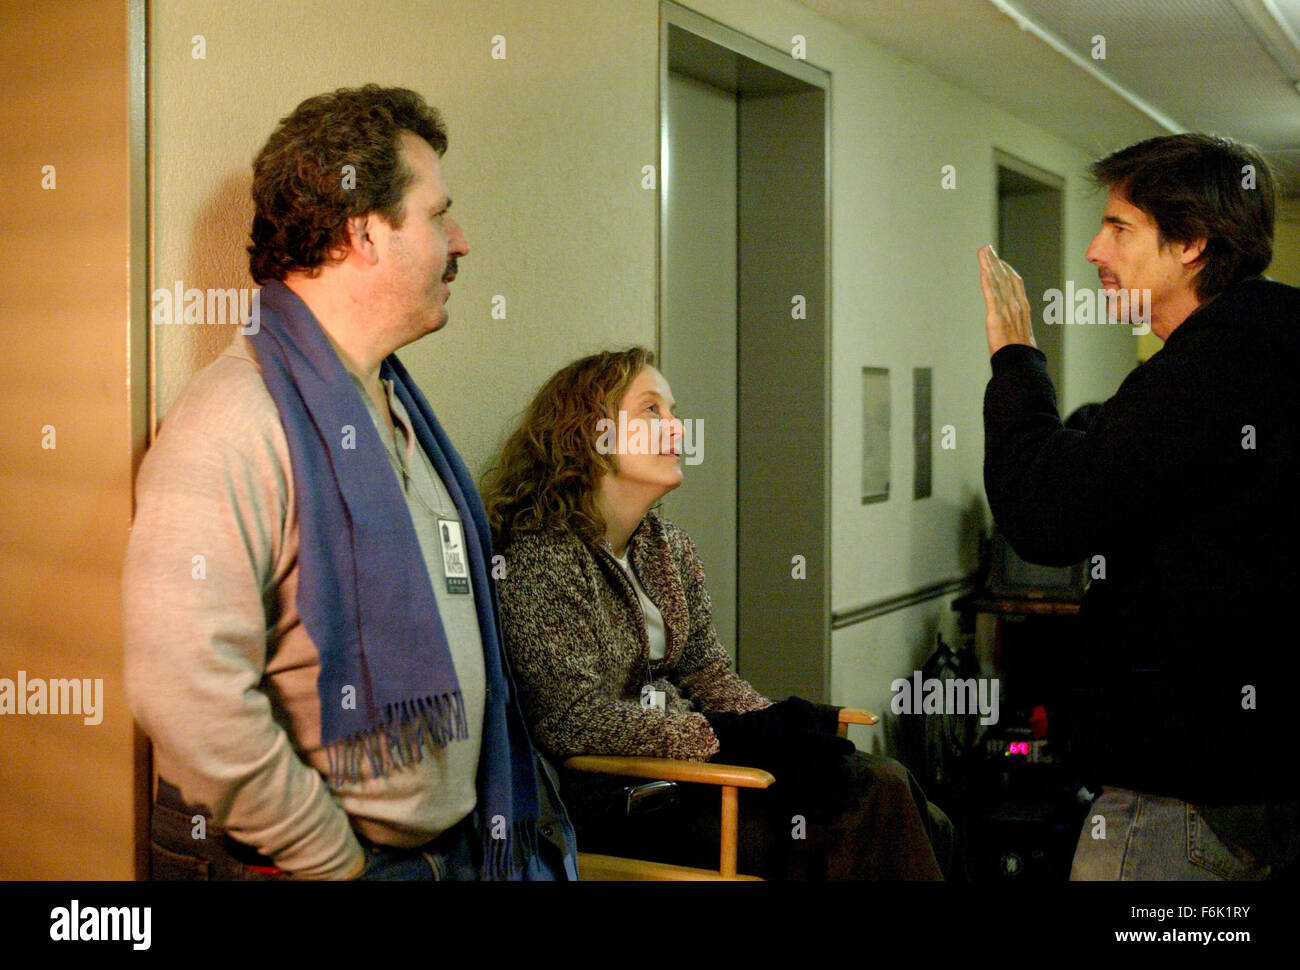 Jun 30, 2005; New York, NY, USA; (L-R) Producer Bill Mechanic, Executive Producer Ashley Kramer, Director Walter Salles . Mandatory Credit: Photo by Touchstone Pictures. (Ac) Copyright 2005 by Courtesy of Touchstone Pictures Stock Photo